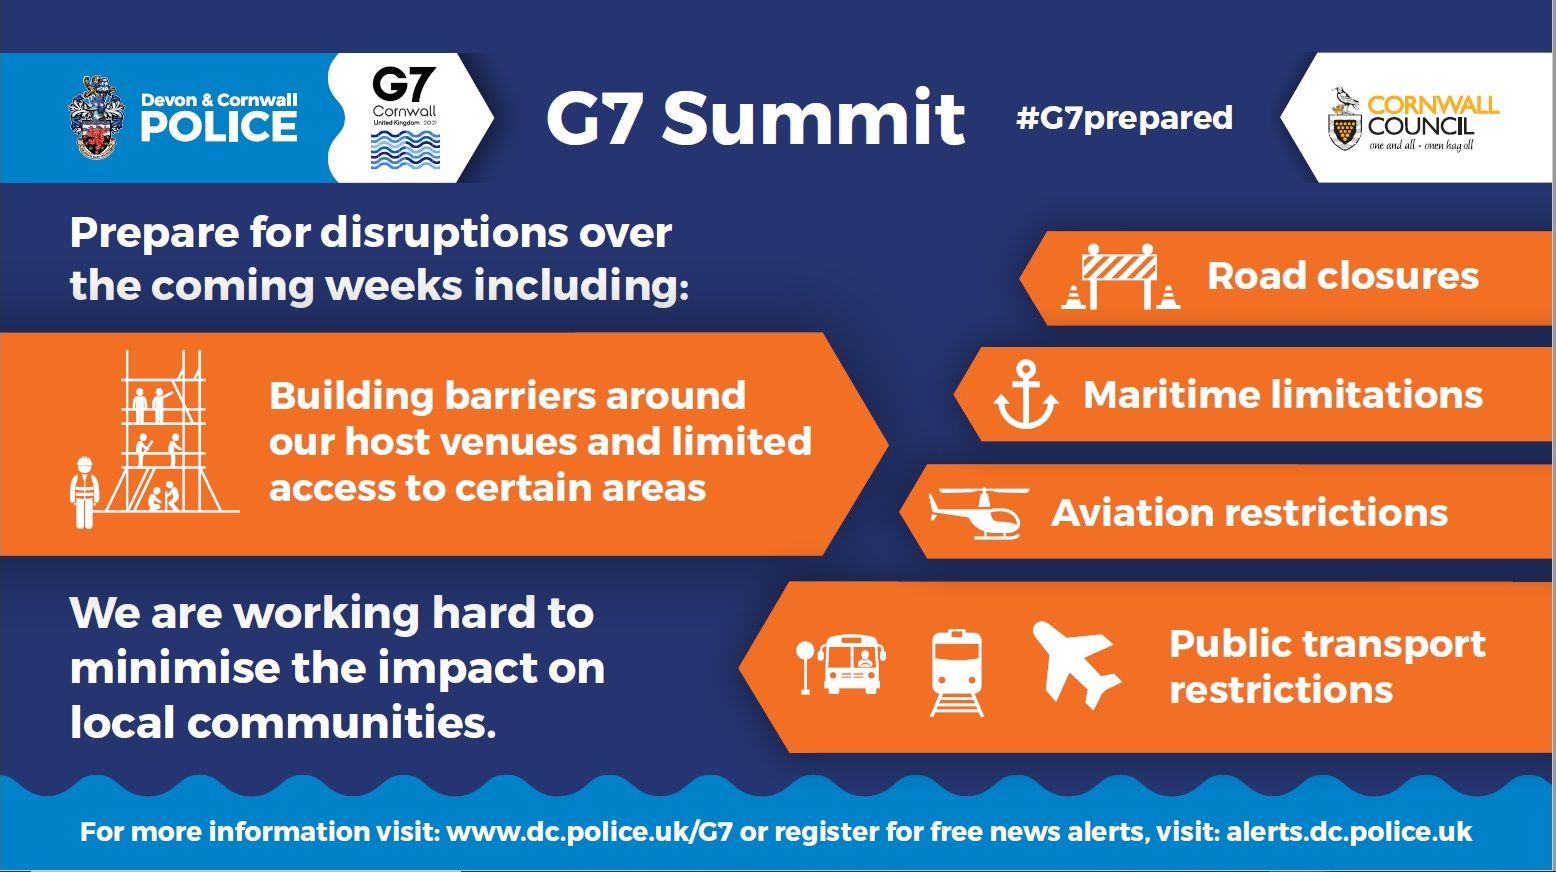 A graphic showing what disruption to expect in Cornwall during the G7